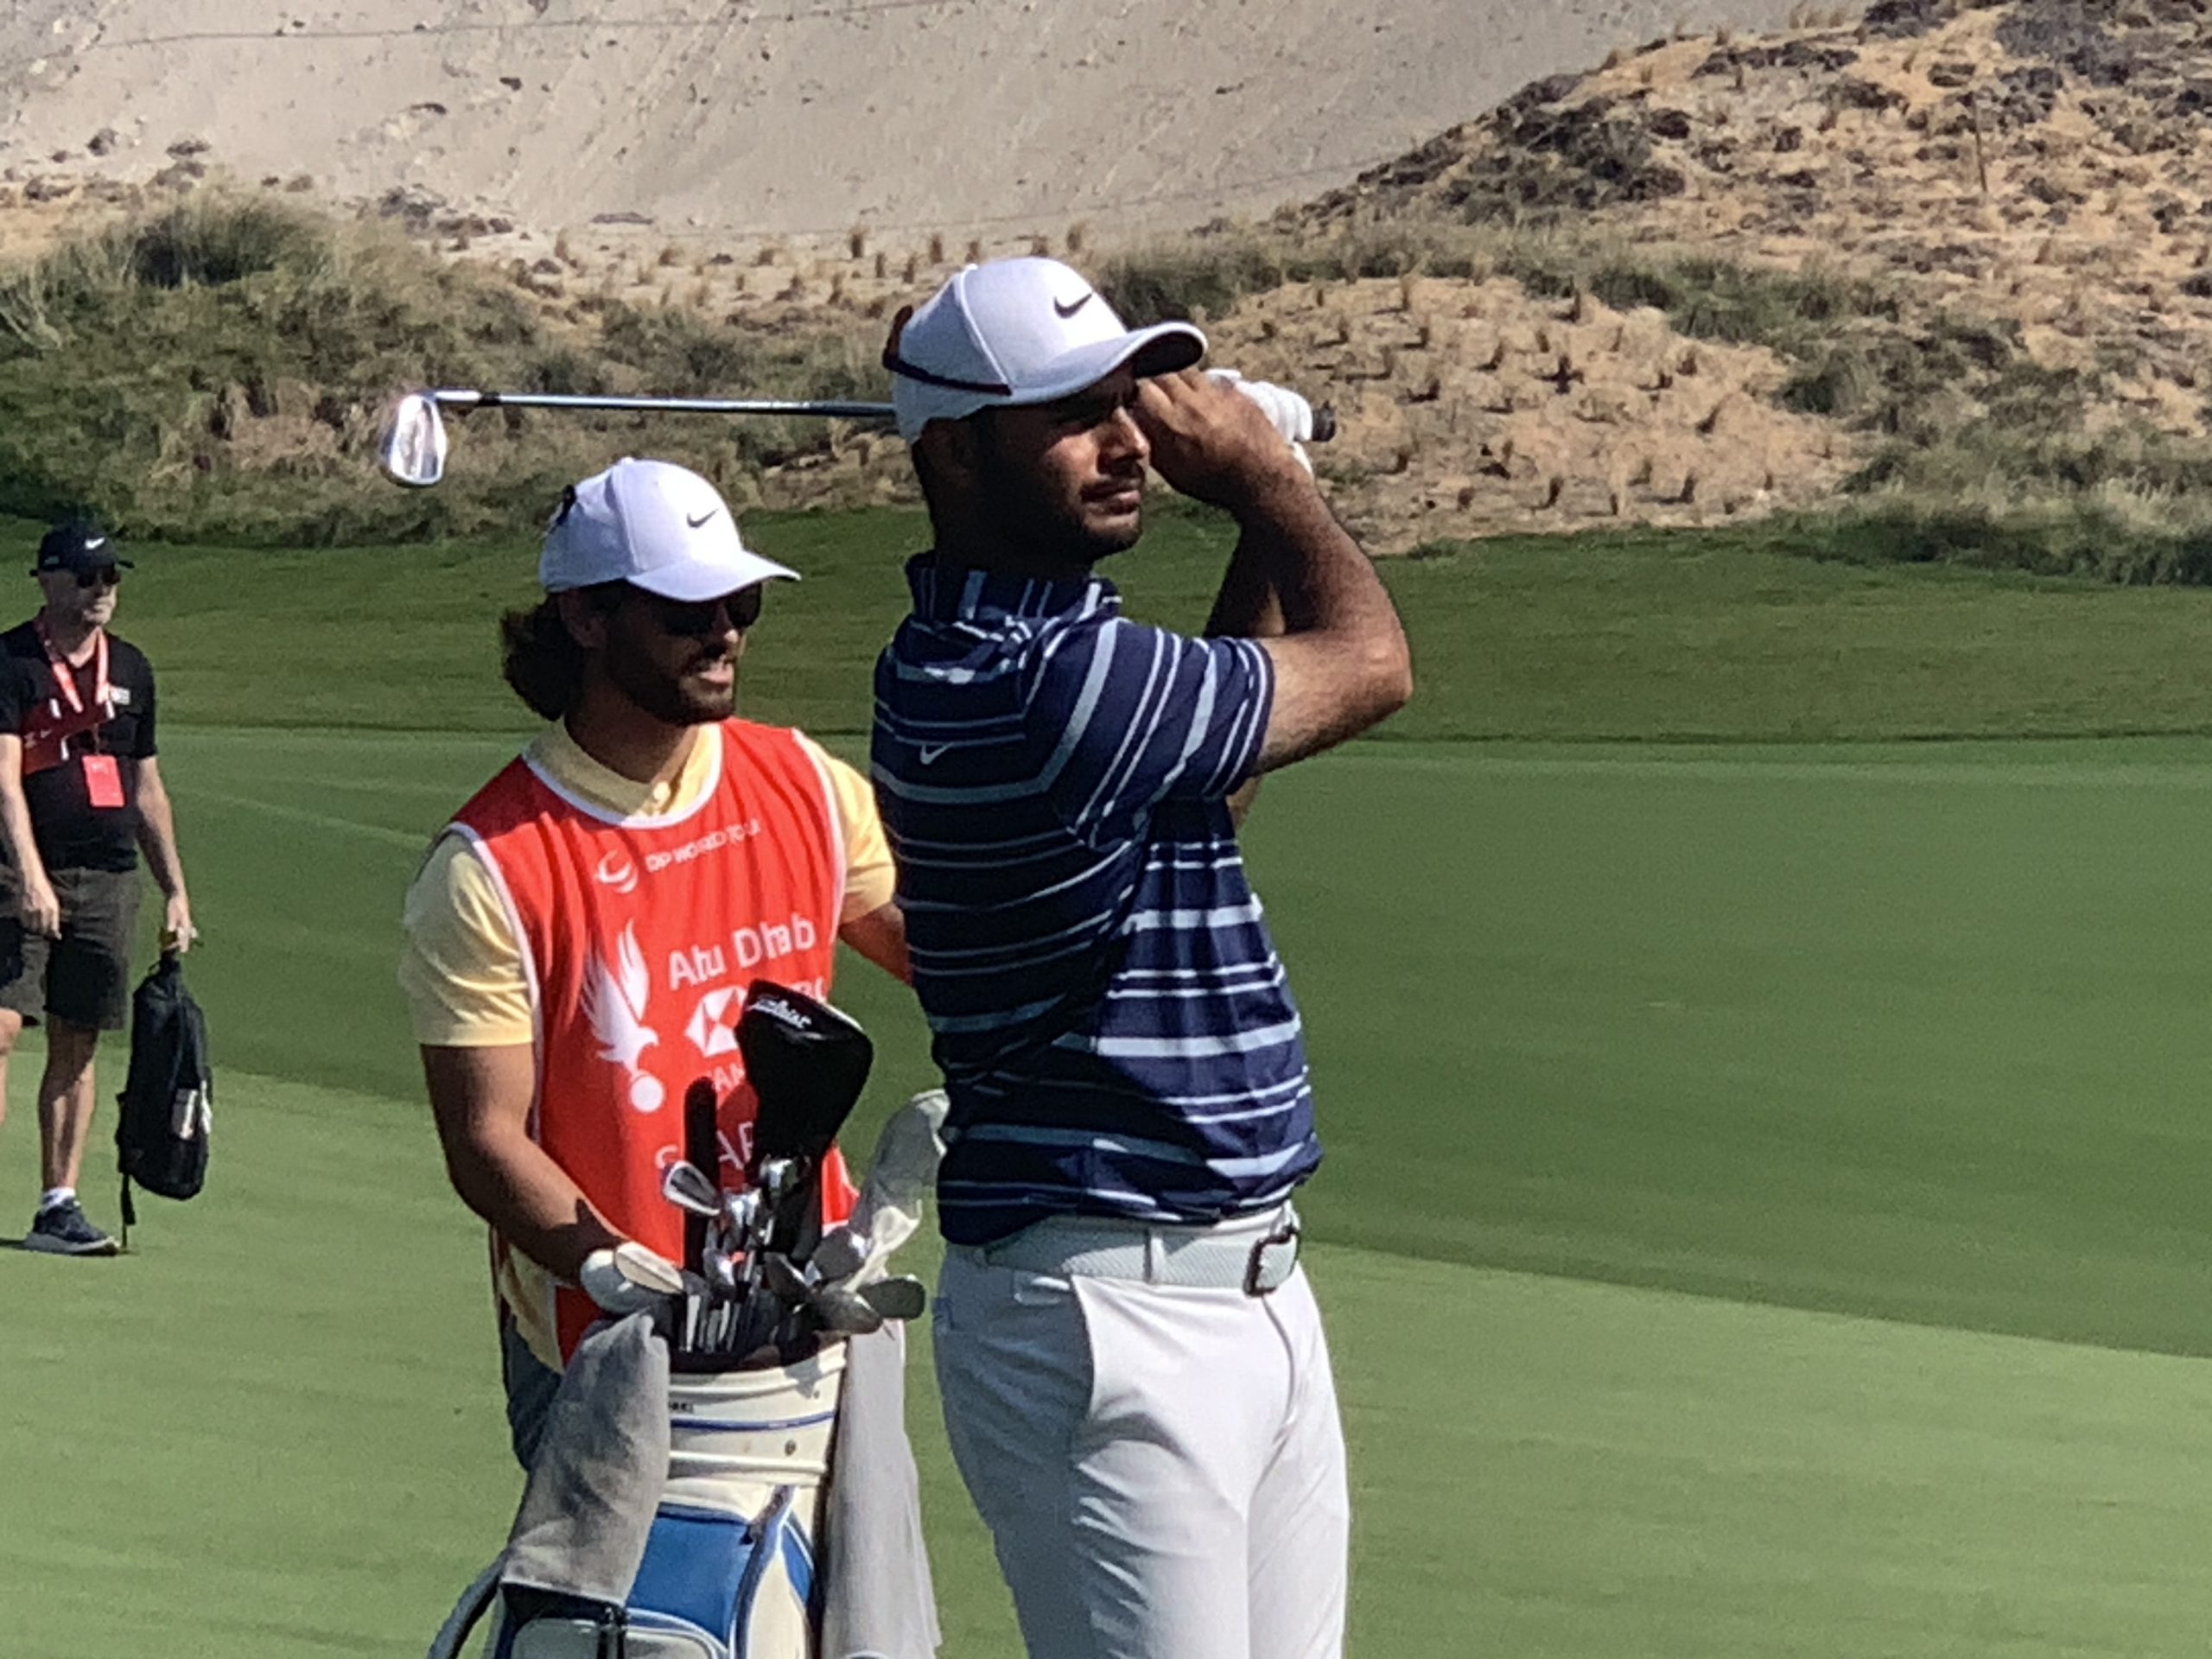 Shubhankar adds 2-under and is placed  ninth in $9m Abu Dhabi golf; Molinari in shared lead